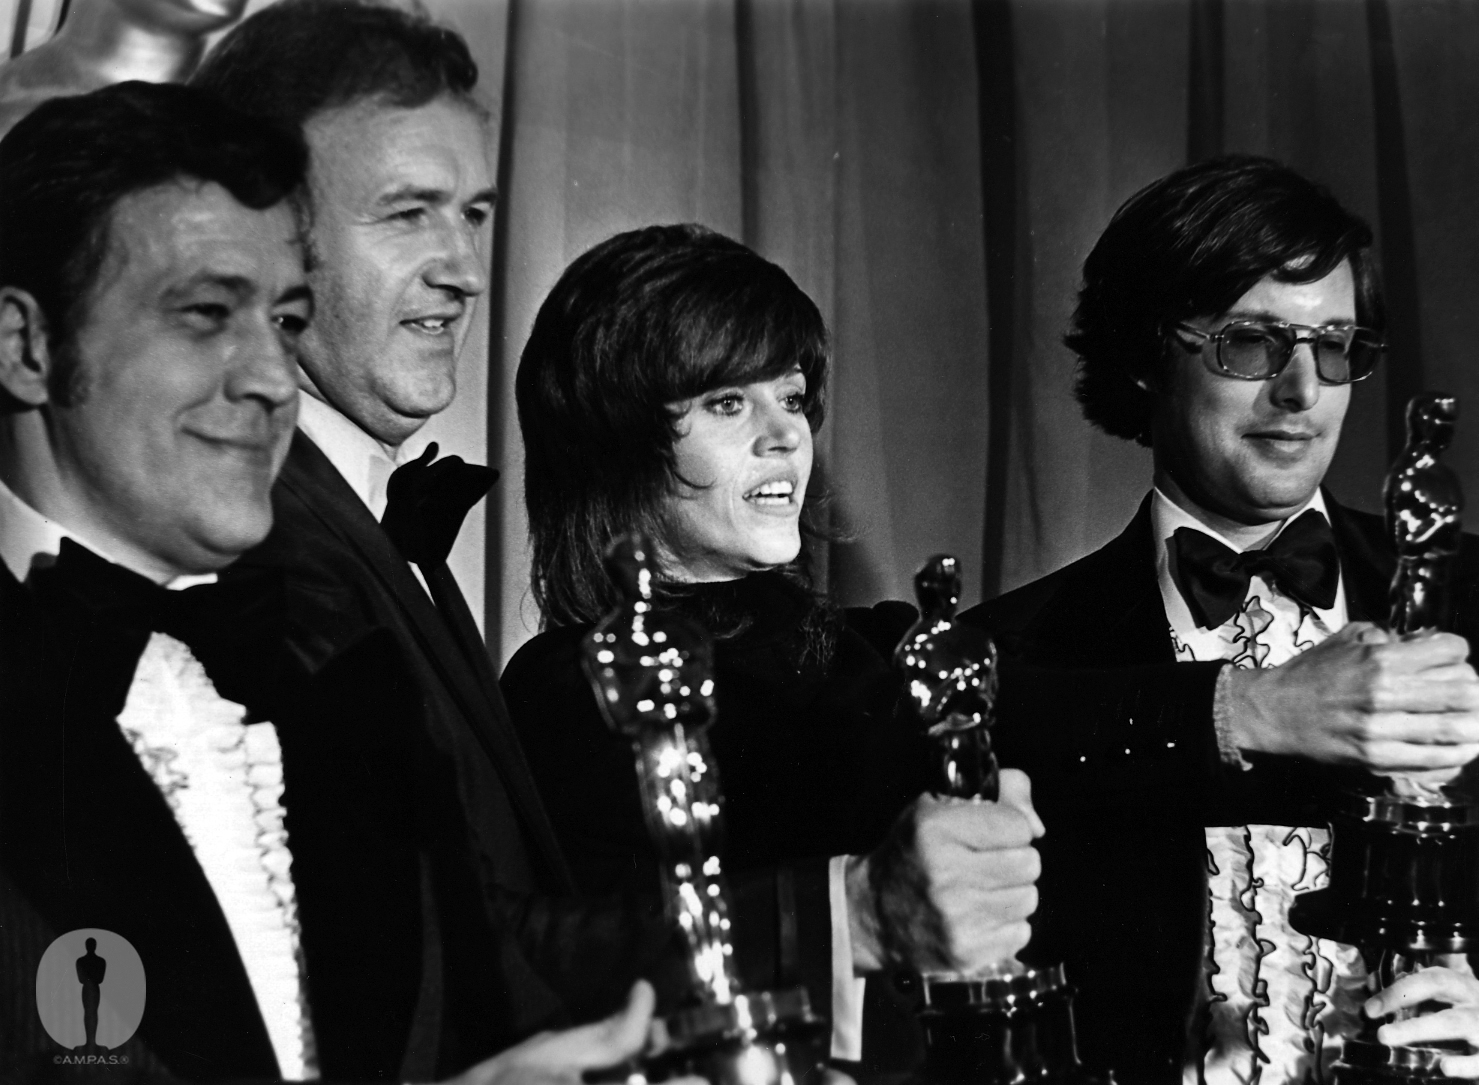 Best Actress Jane Fonda (Klute) flanked by The French Connection winners Philip DAntoni (Best Picture), Gene Hackman (Best Actor), and William Friedkin (Best Director) at the 44th Academy Awards.